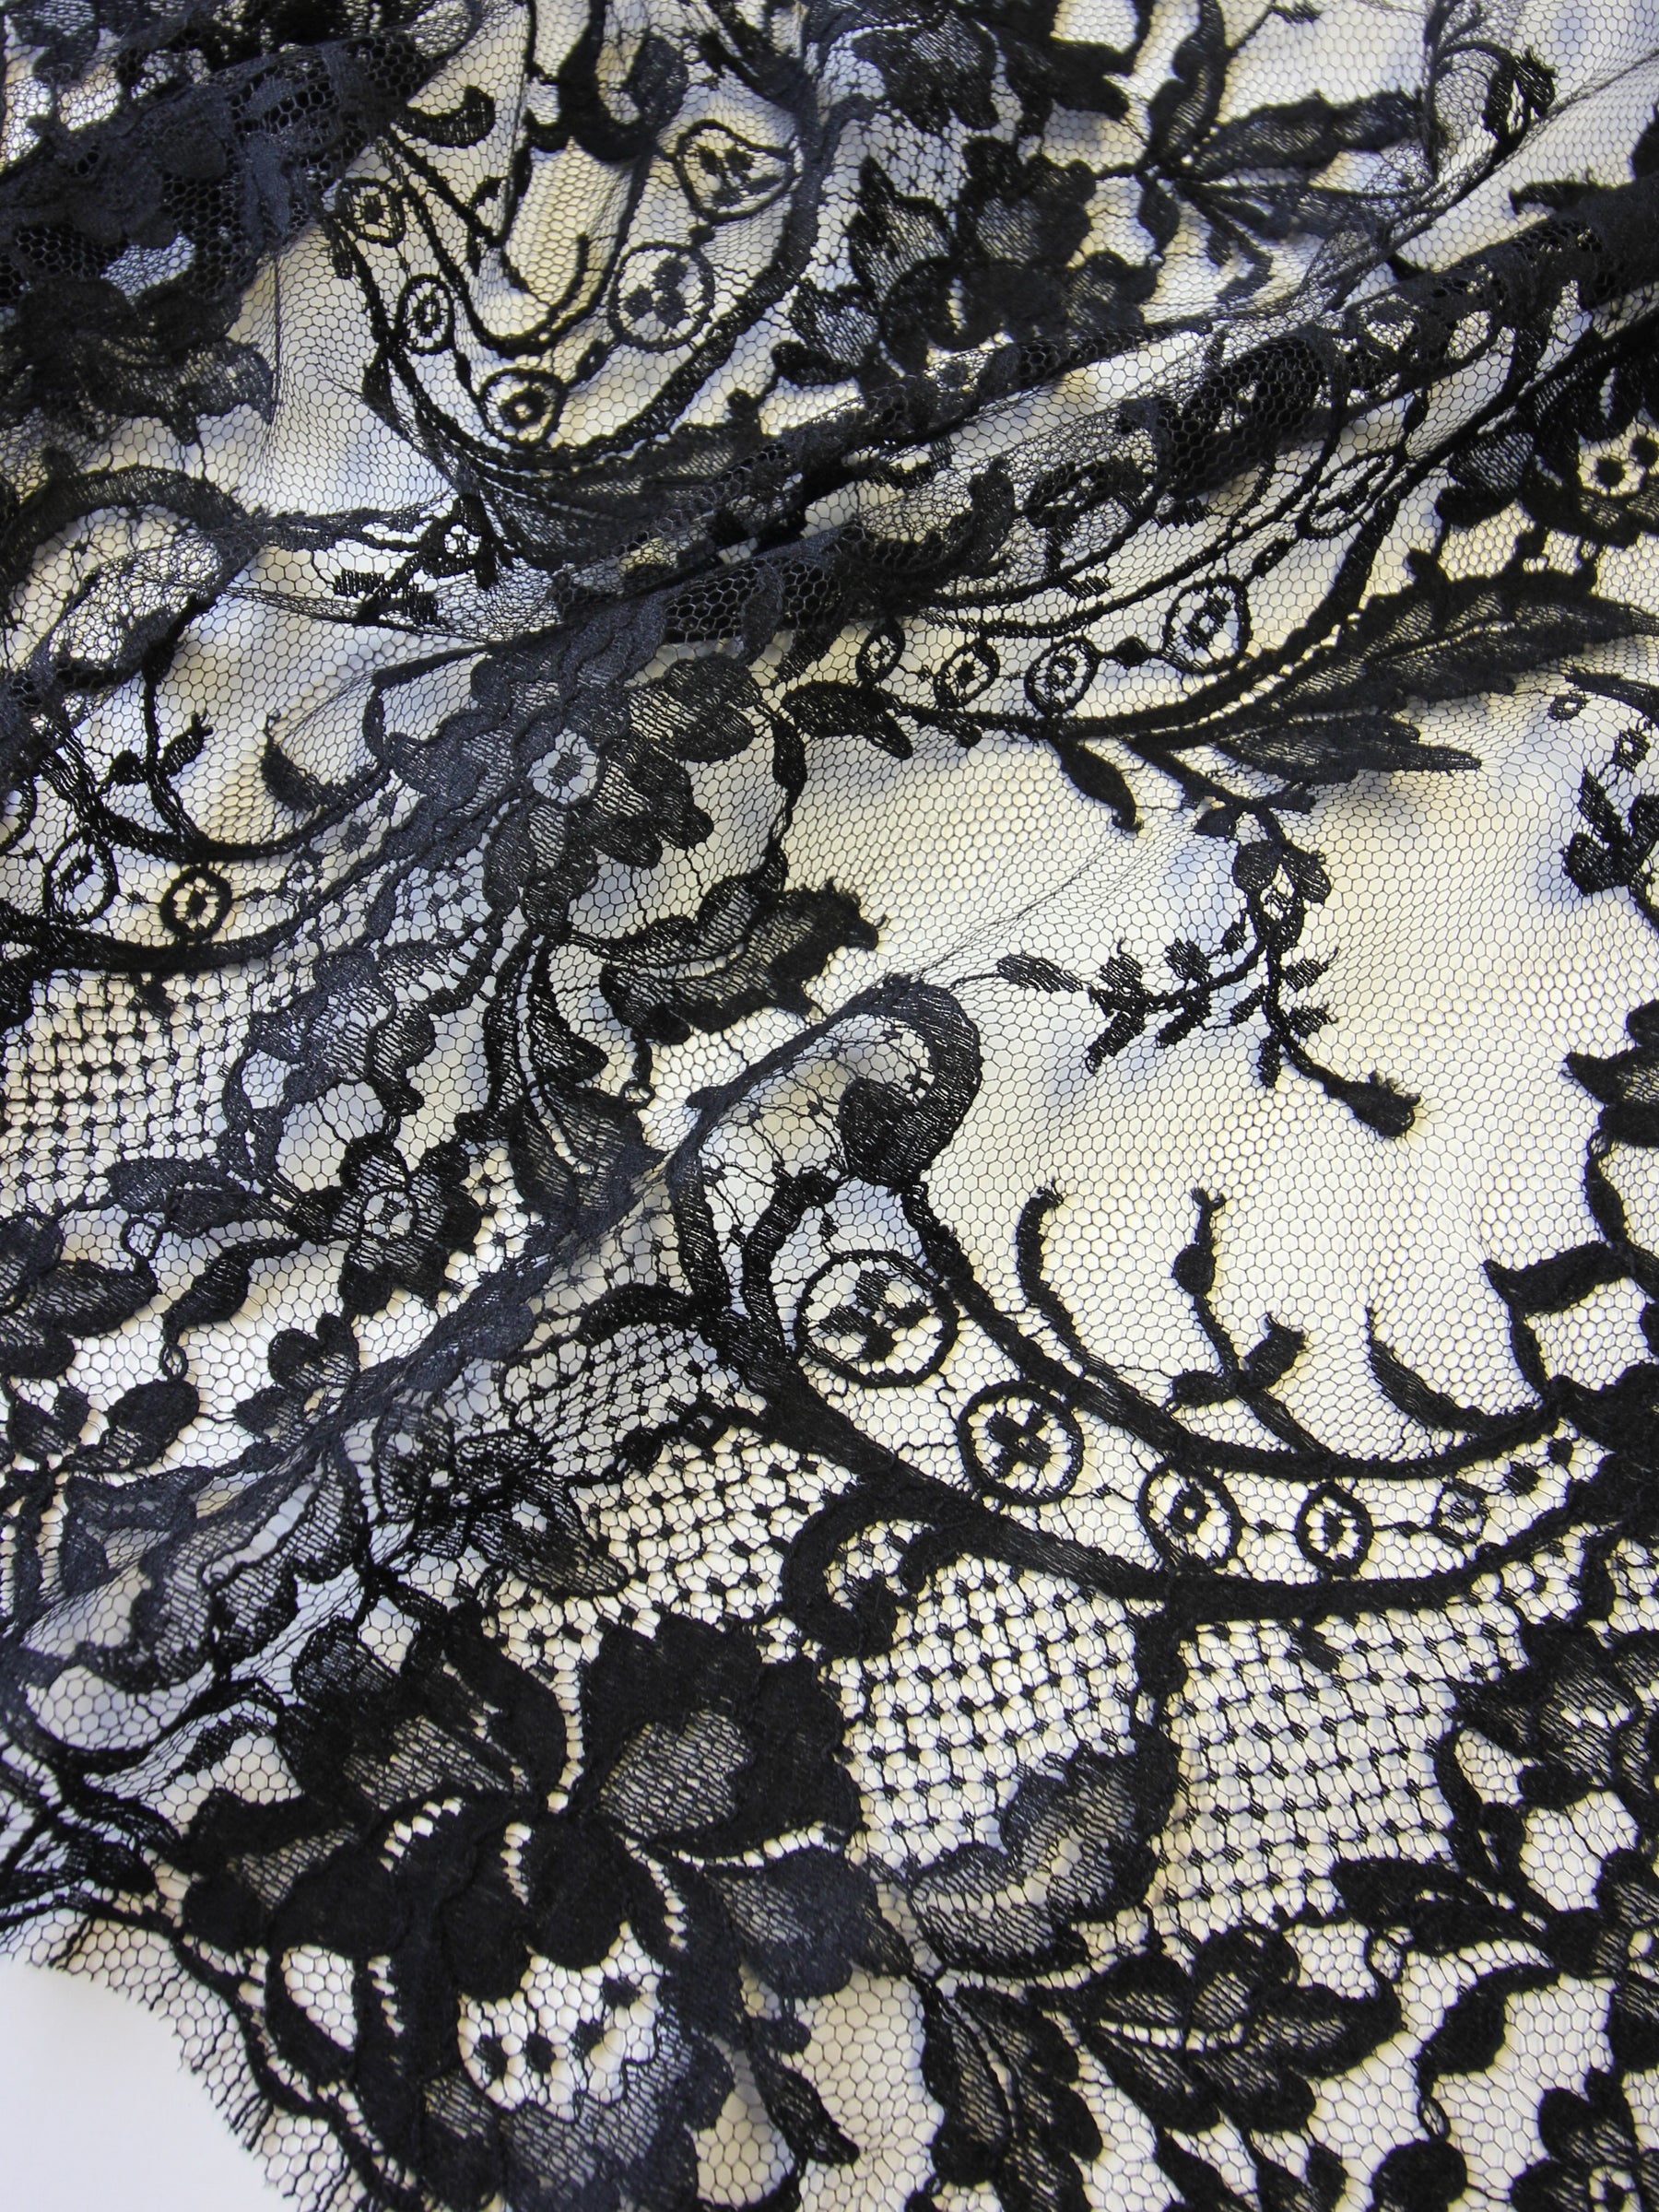 Black lace fabric - Chantilly lace - lace fabric from